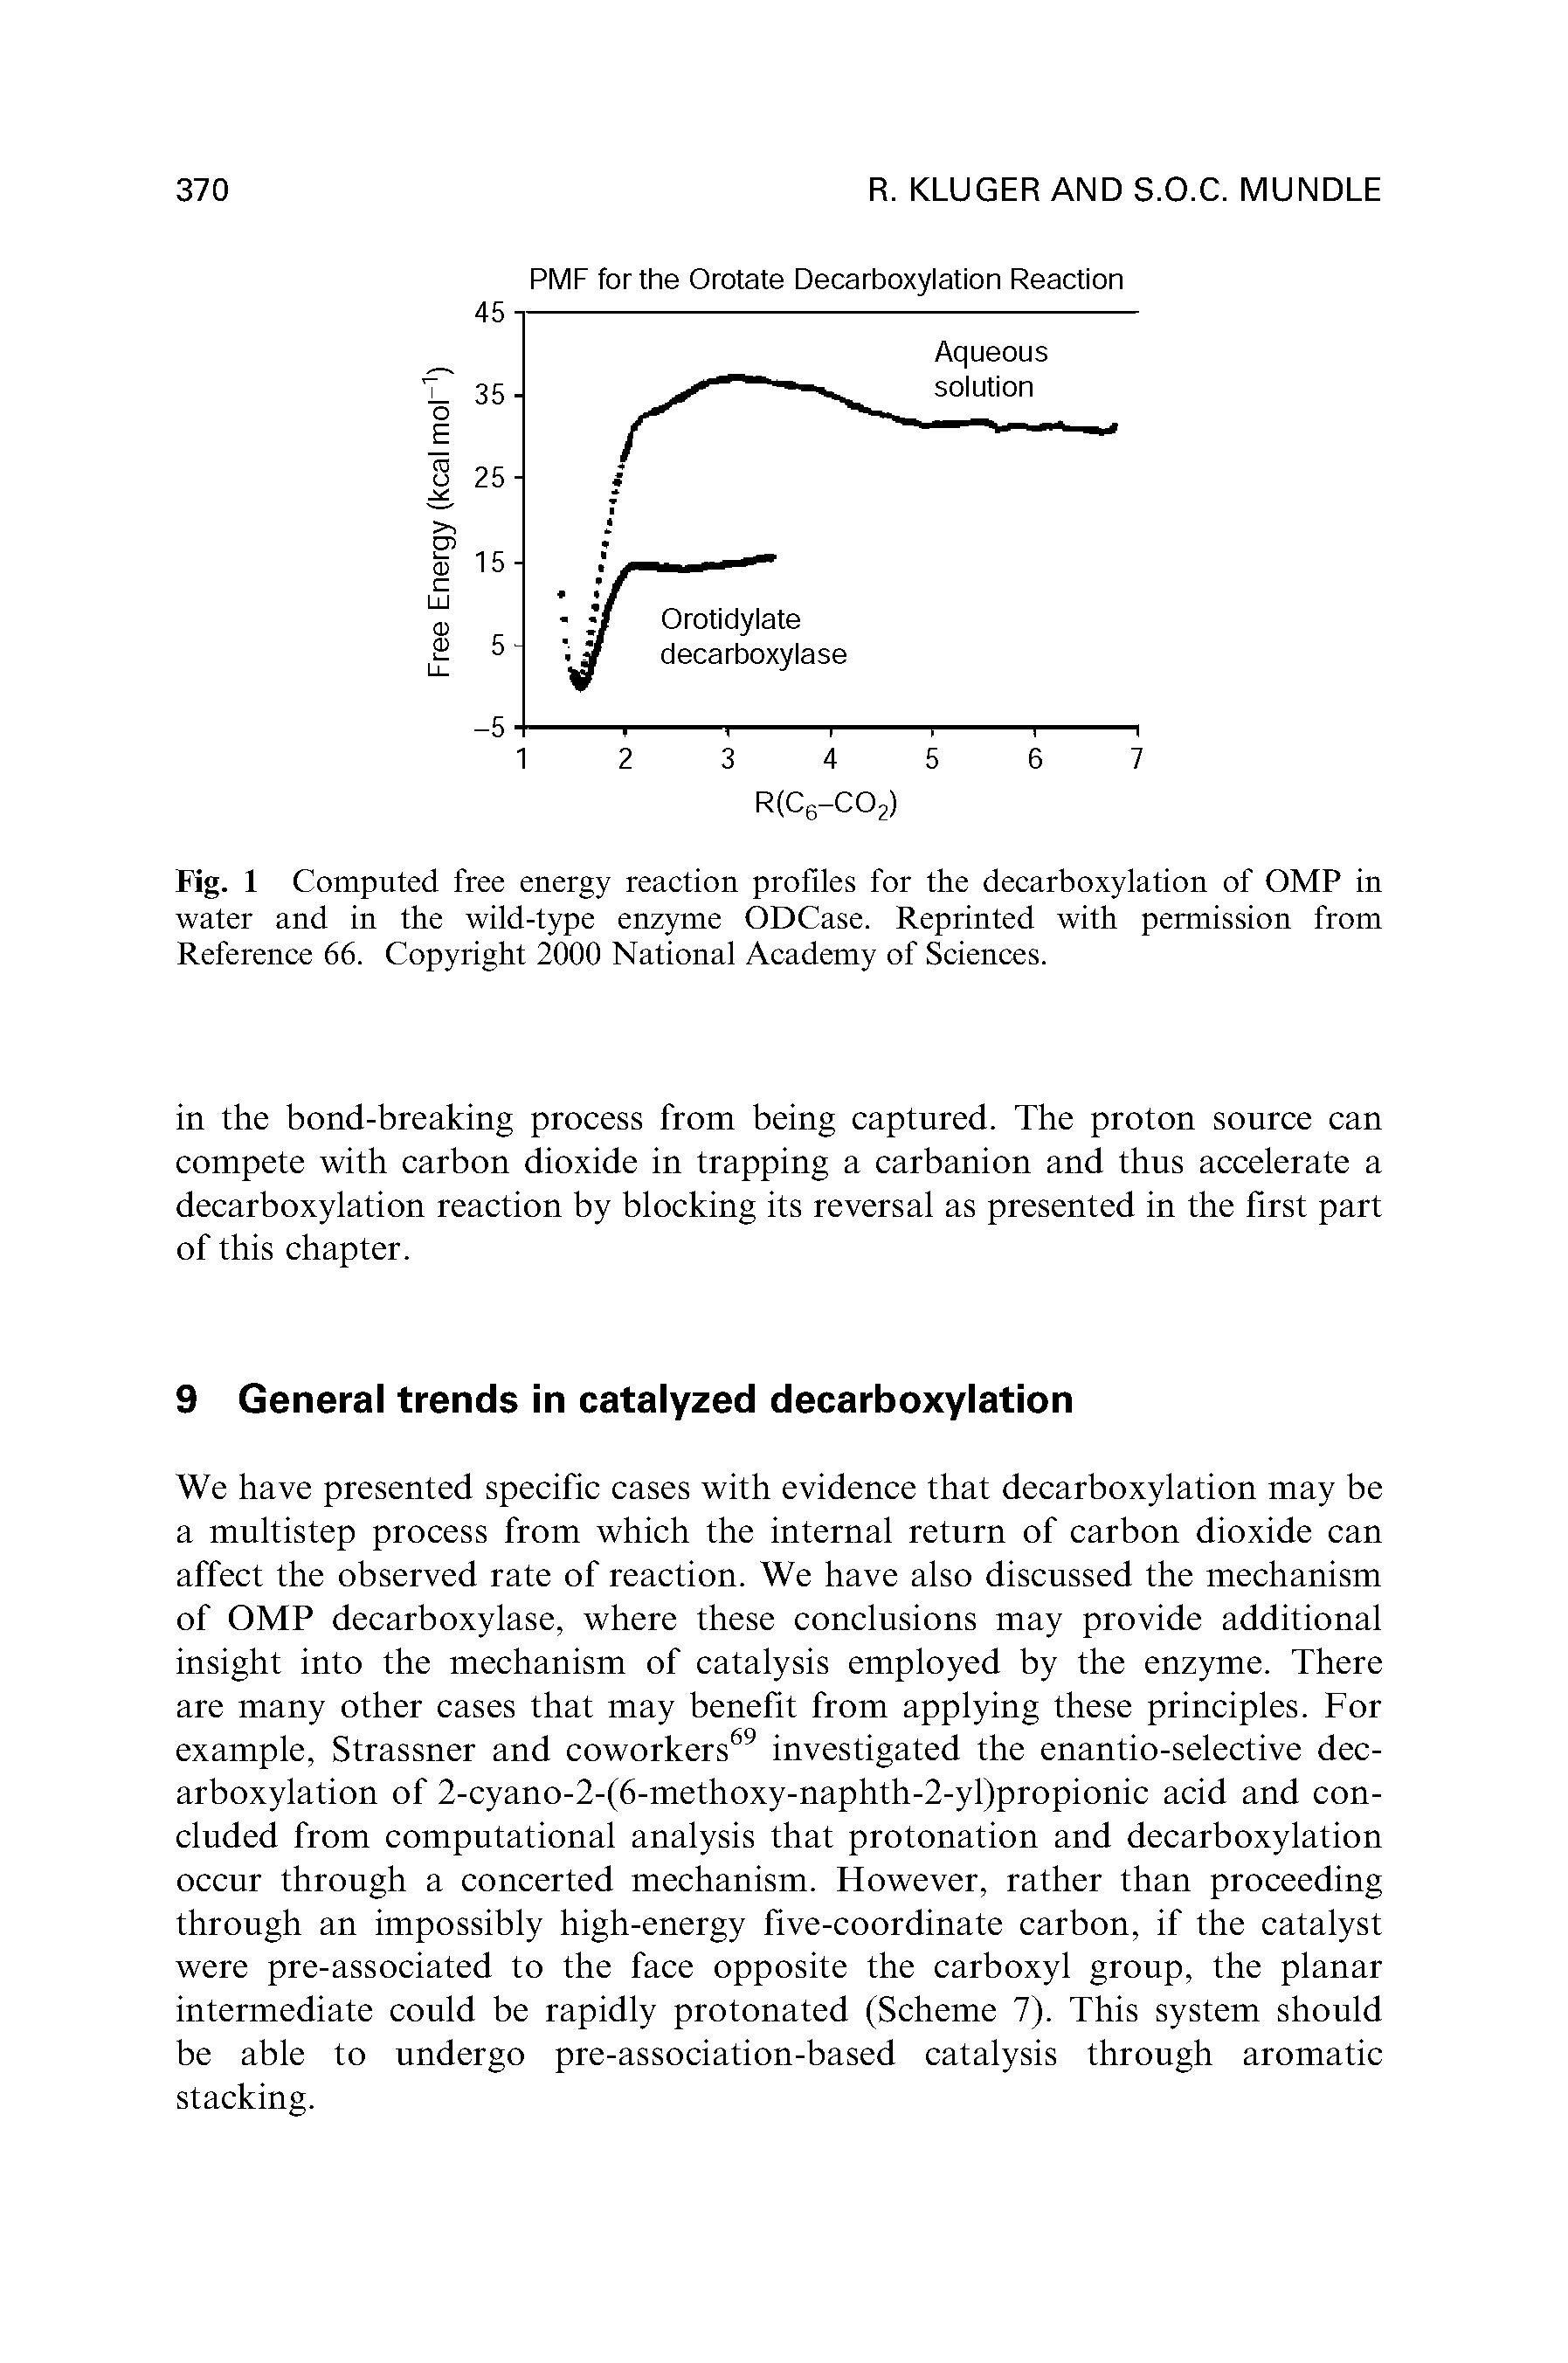 Fig. 1 Computed free energy reaction profiles for the decarboxylation of OMP in water and in the wild-type enzyme ODCase. Reprinted with permission from Reference 66. Copyright 2000 National Academy of Sciences.